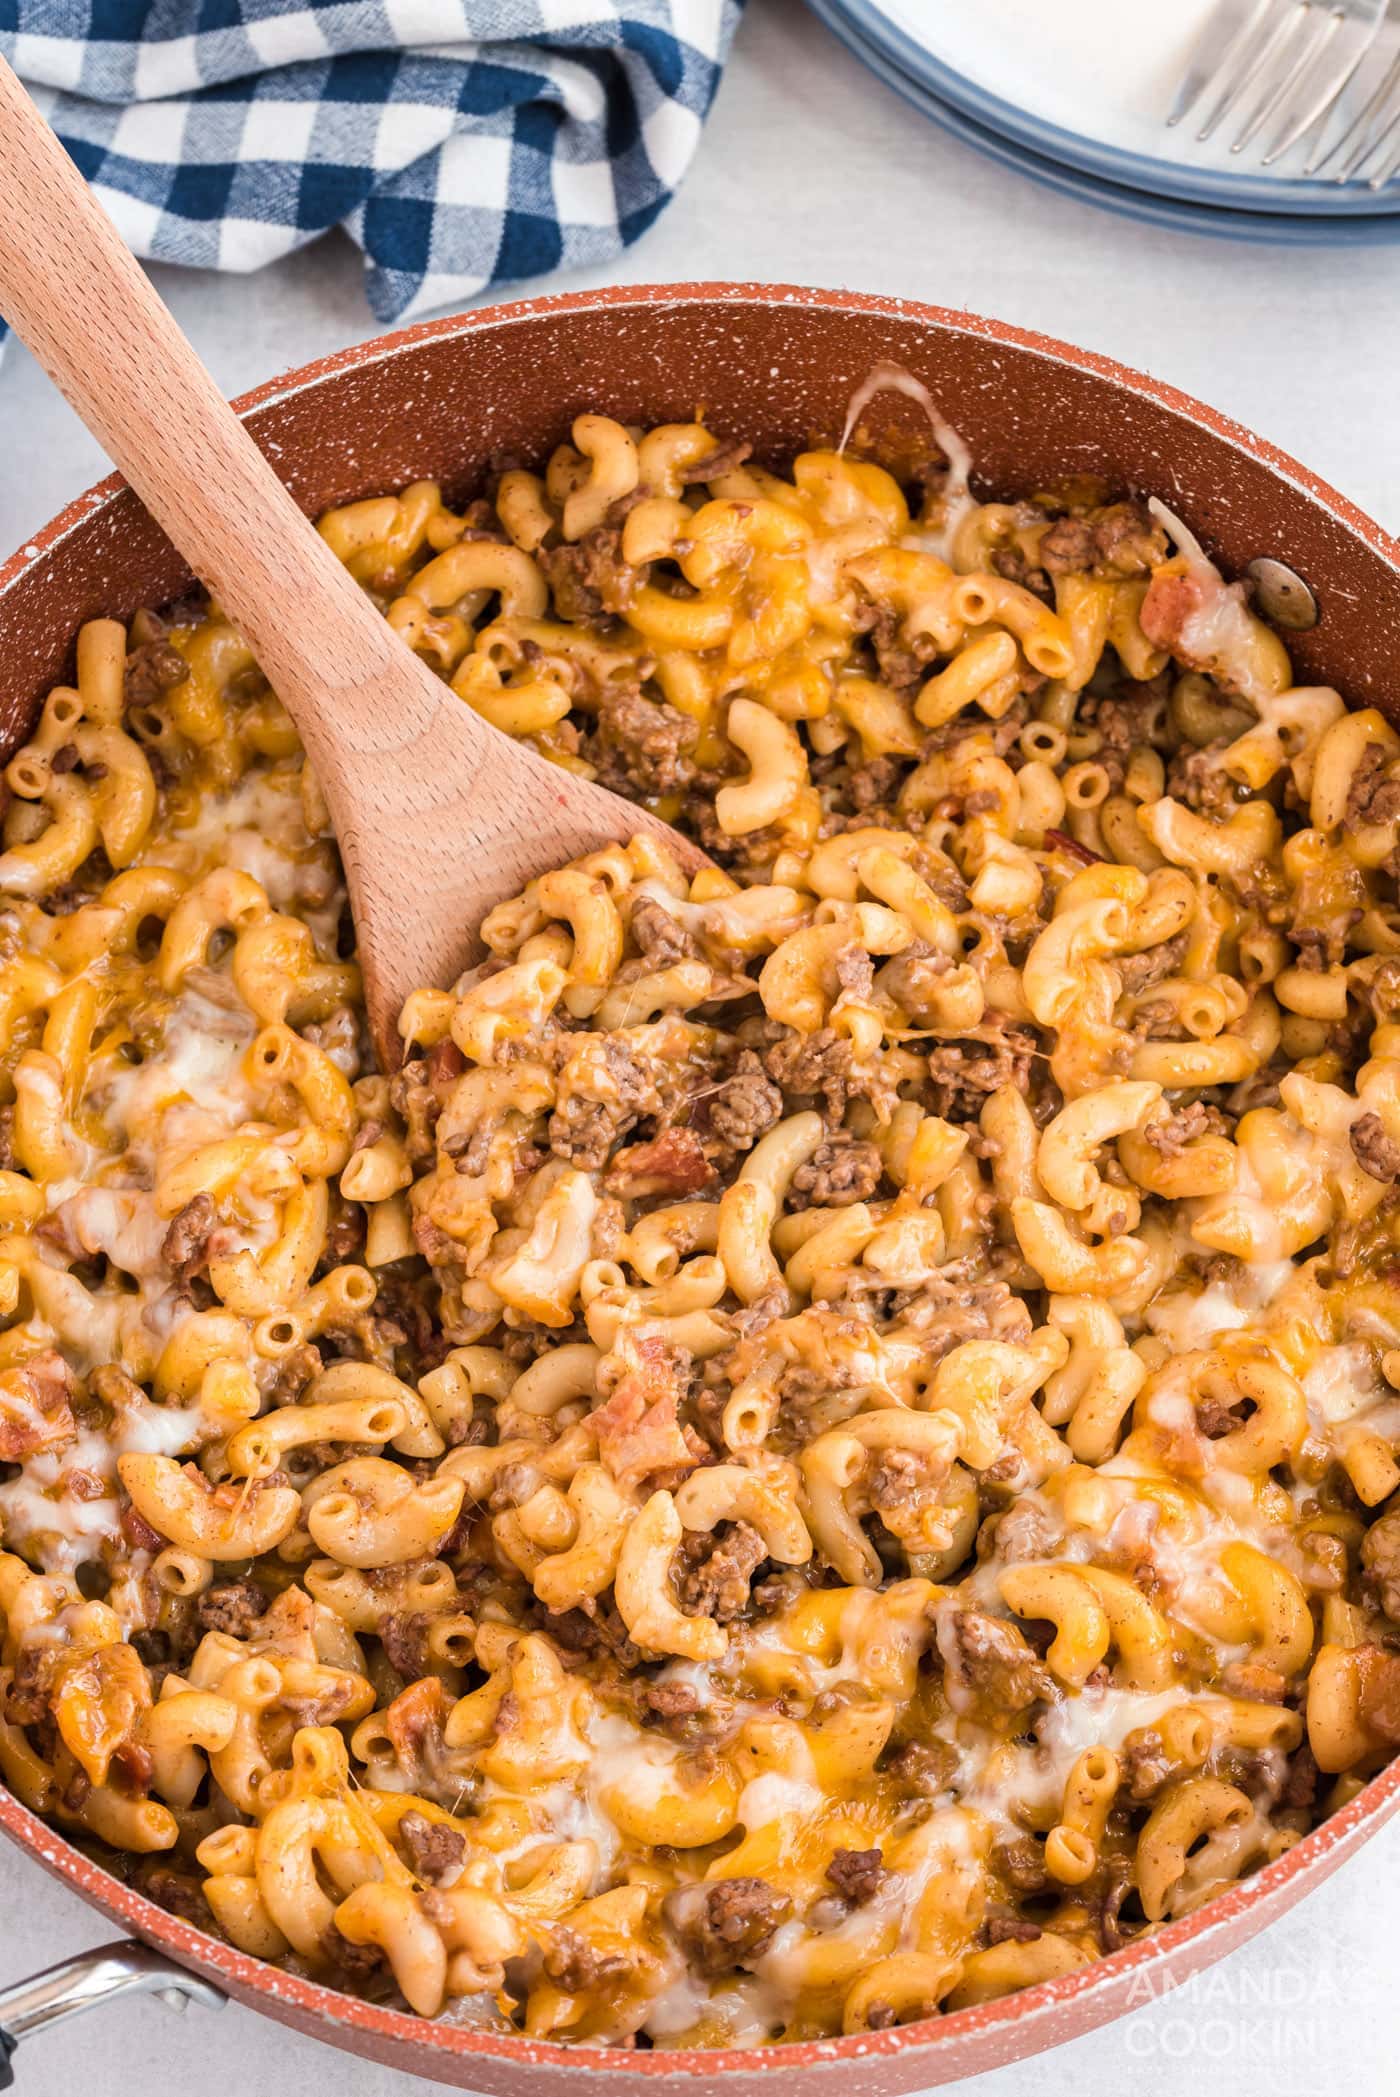 A skillet with cheesy beef and macaroni, perfect for busy families, with a wooden spoon stirring the mixture, framed by a blue and white checkered napkin and a plate in the background.